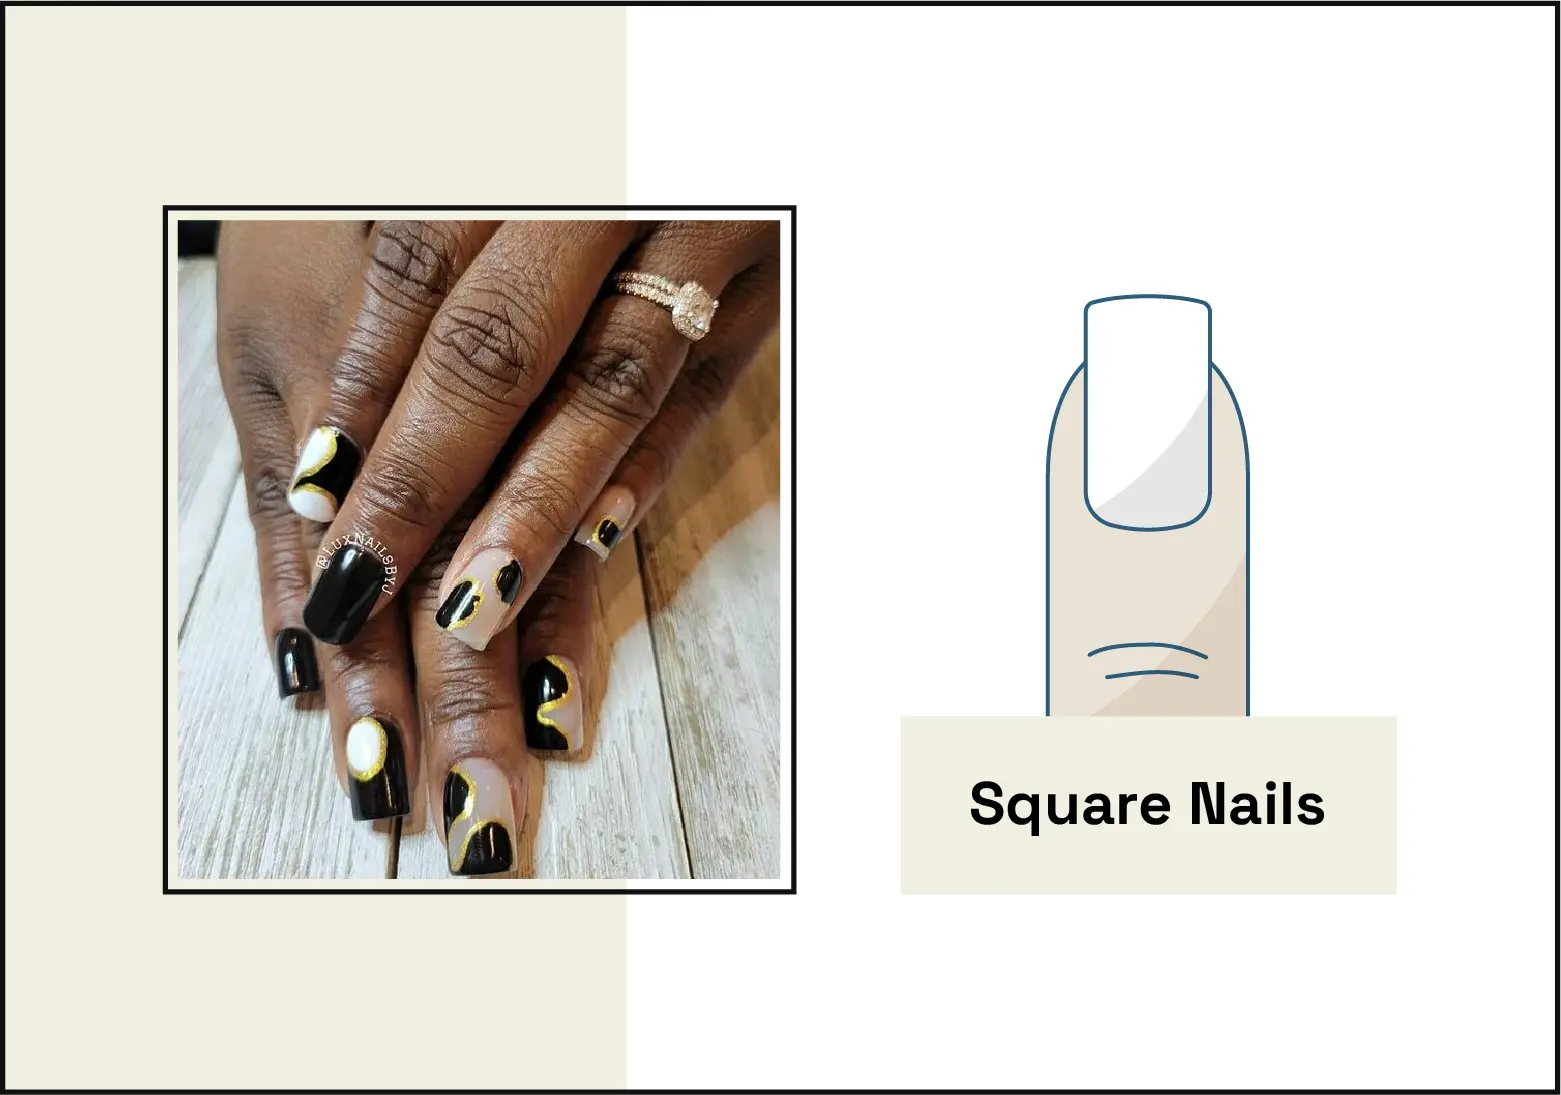 photo of manicure with square nails with black, white, and gold nail art on the left, illustration of the square nail shape on the right